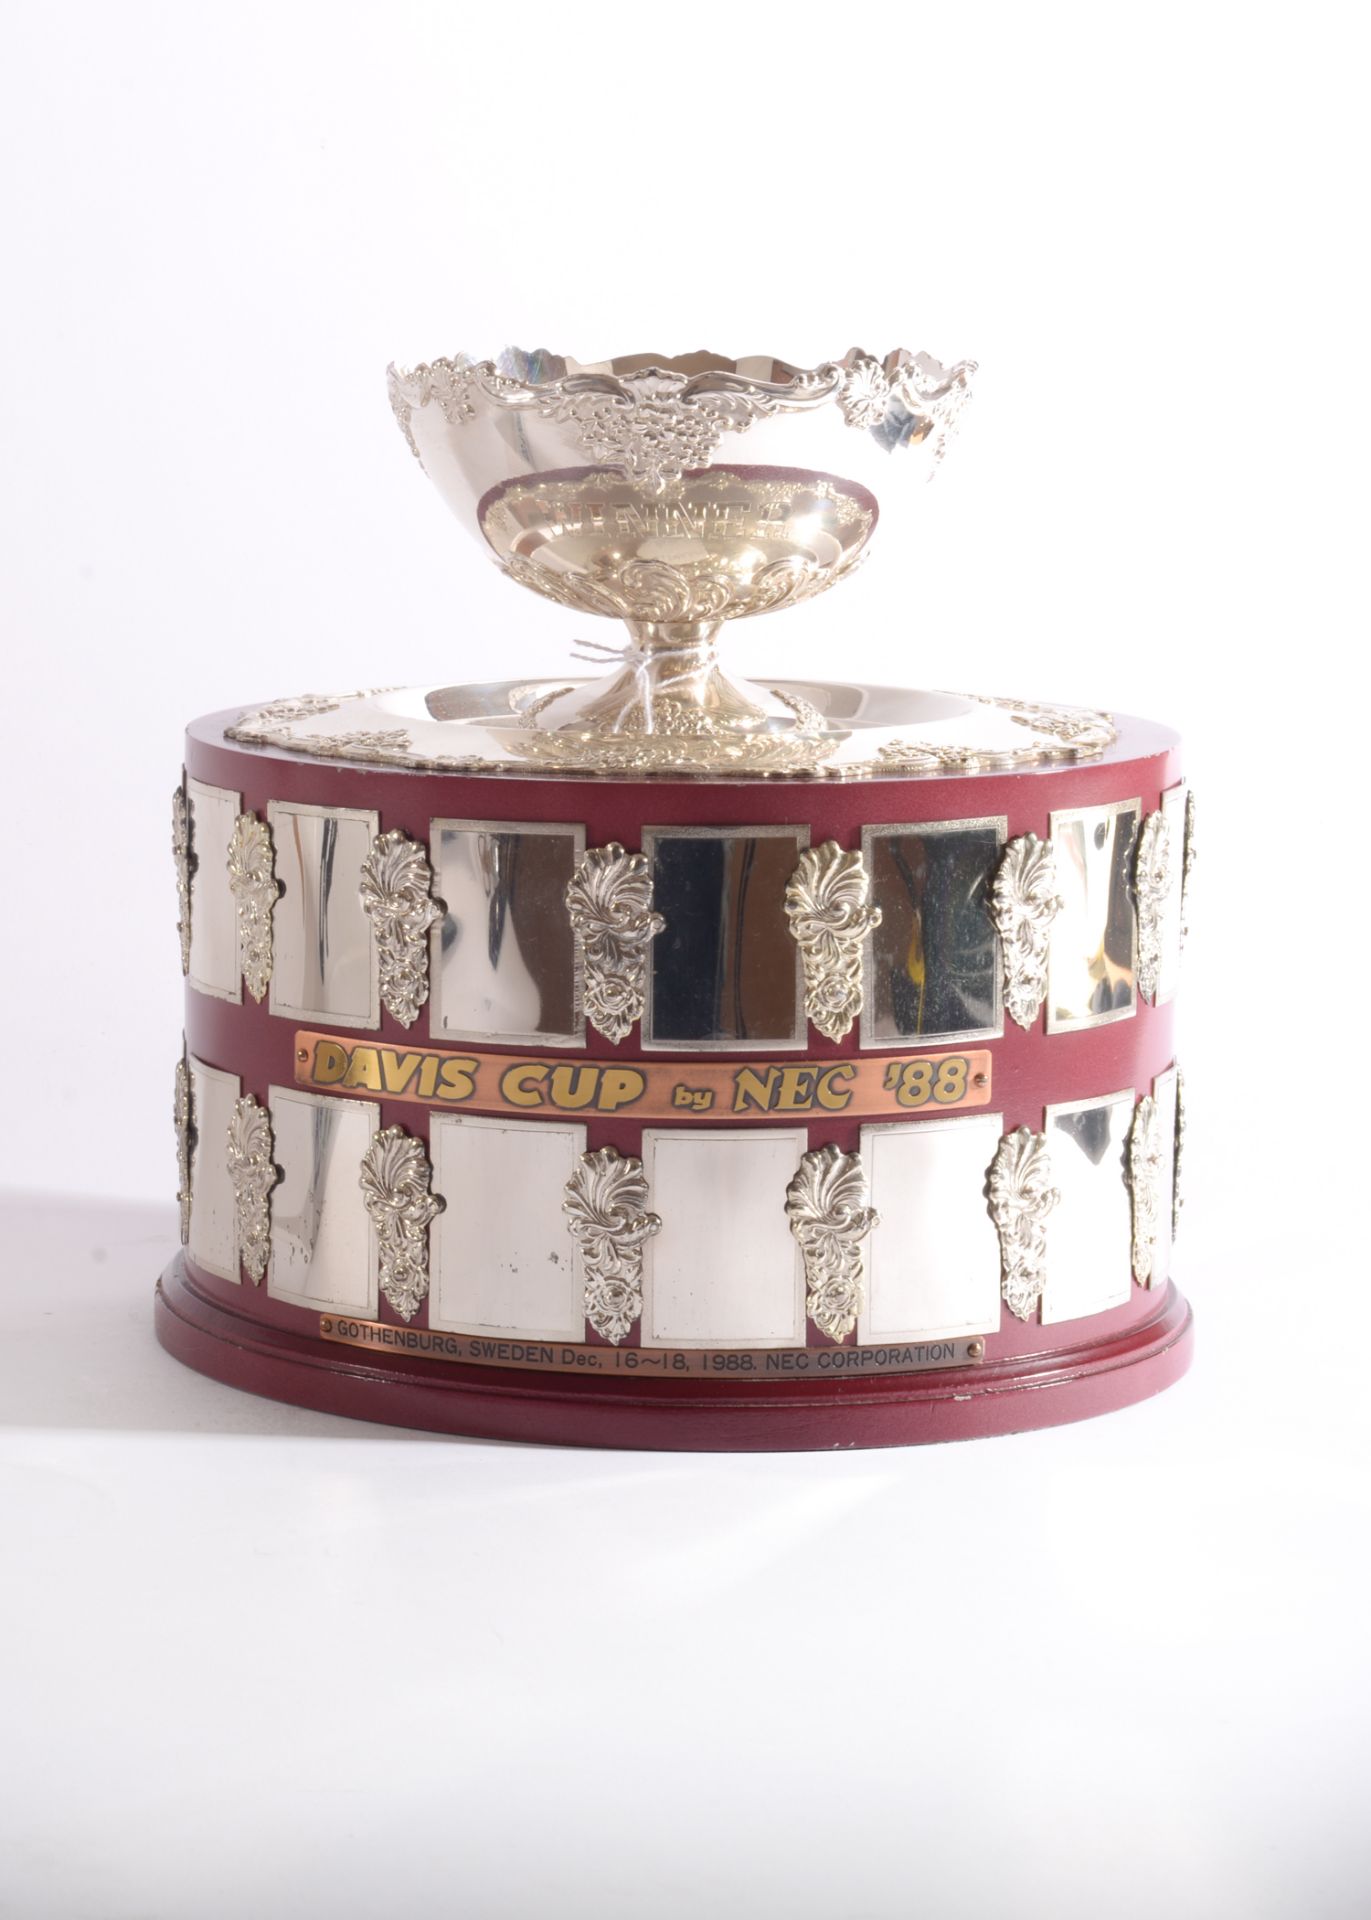 A Scale Replica of the Davis Cup Winners Trophy presented to Boris Becker for his participation in - Image 2 of 3